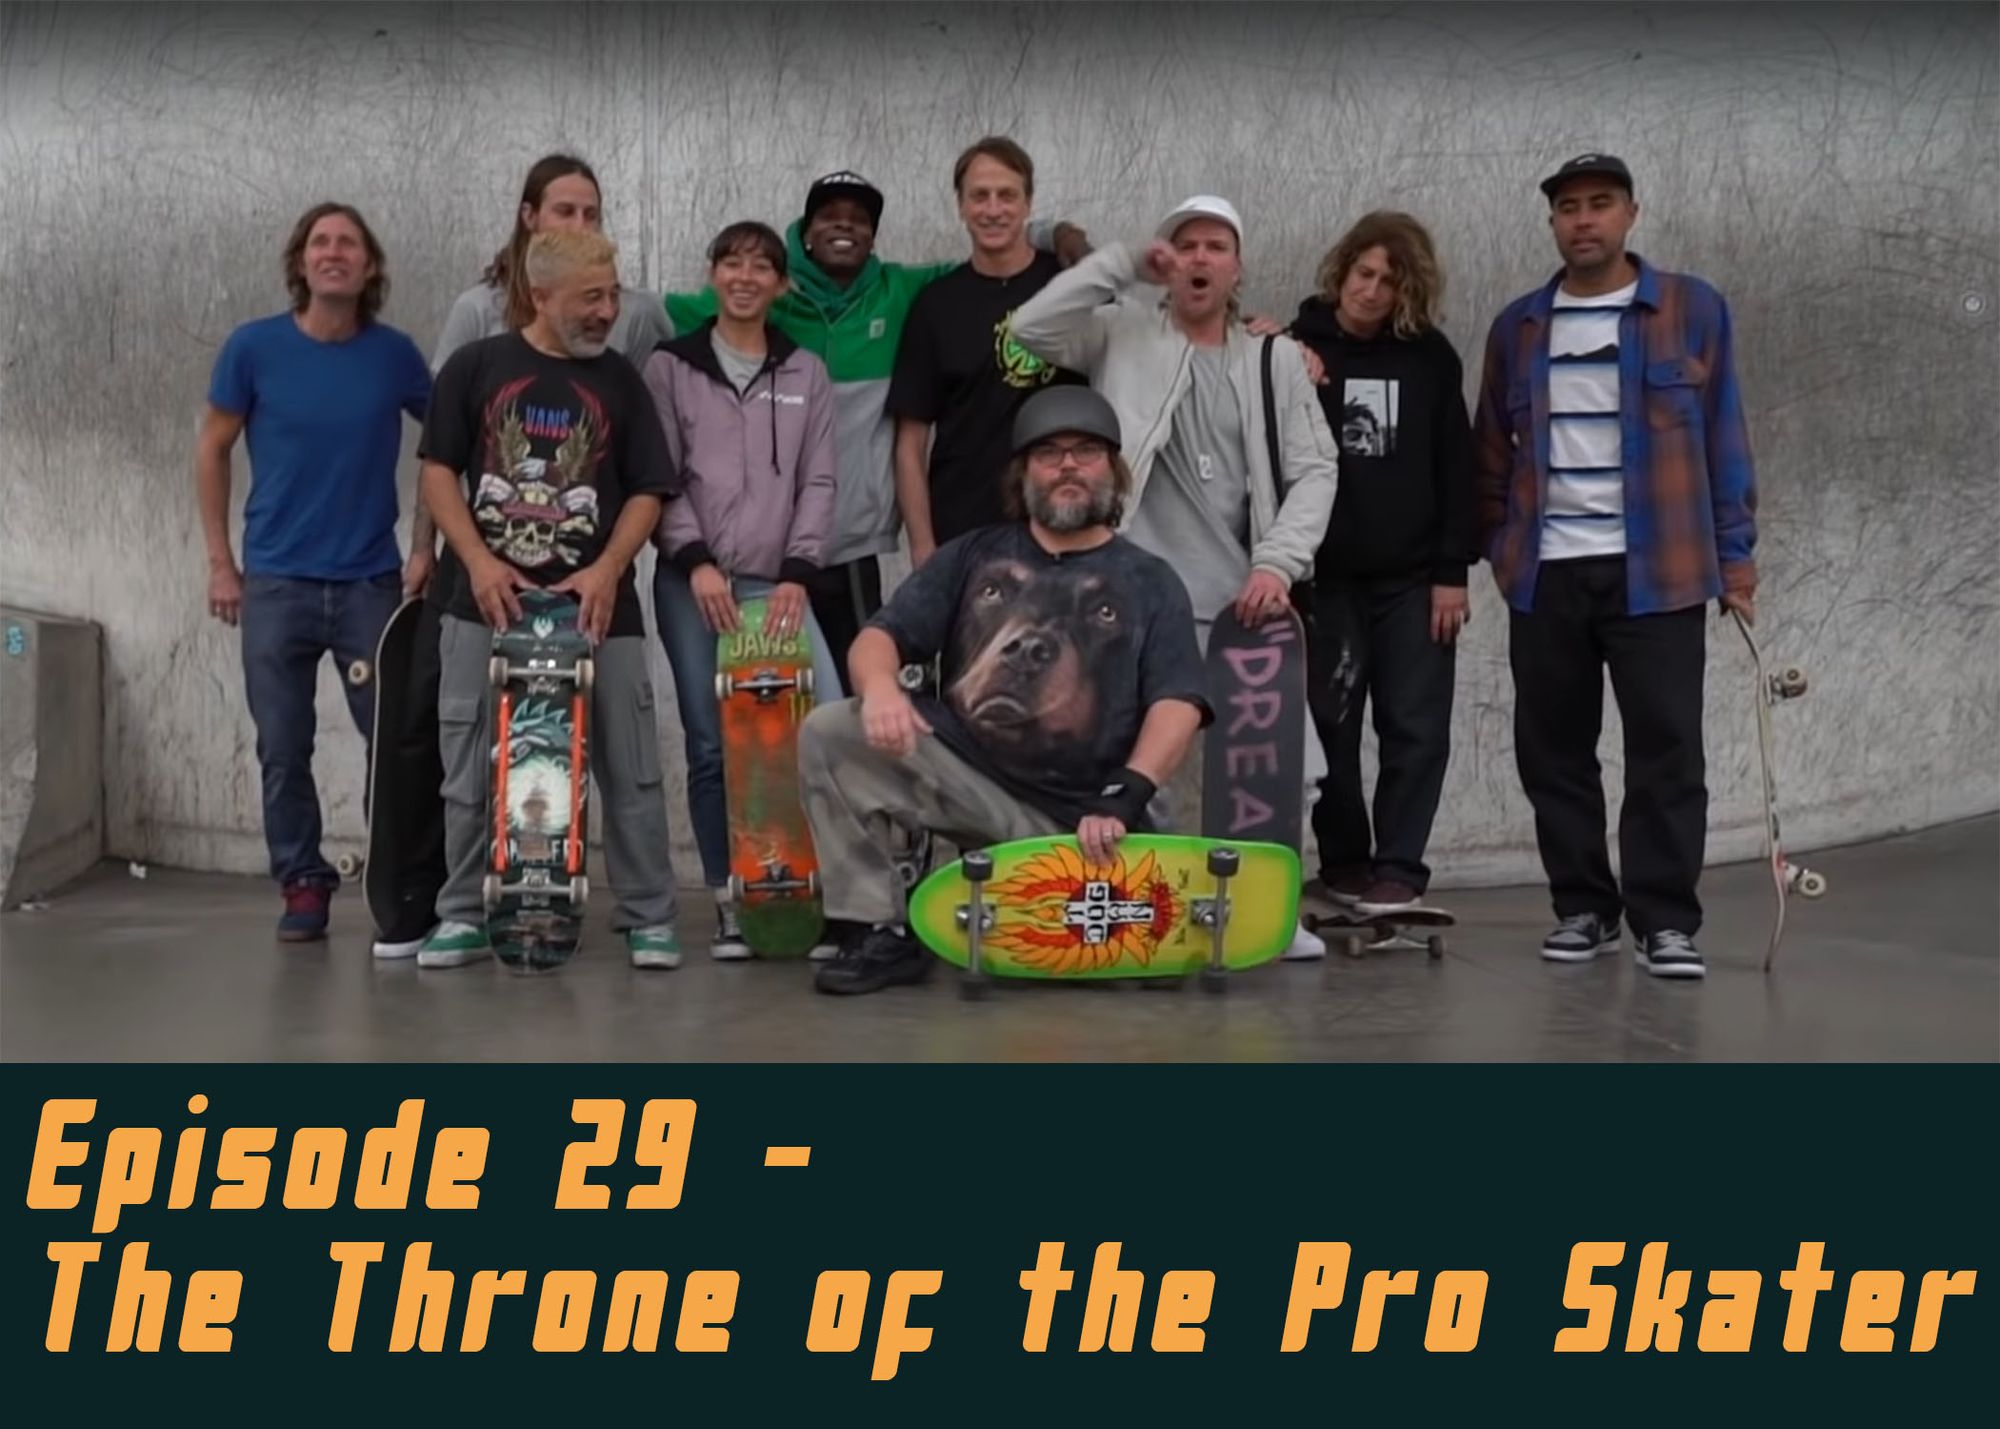 Episode 29 - The Throne of the Pro Skater